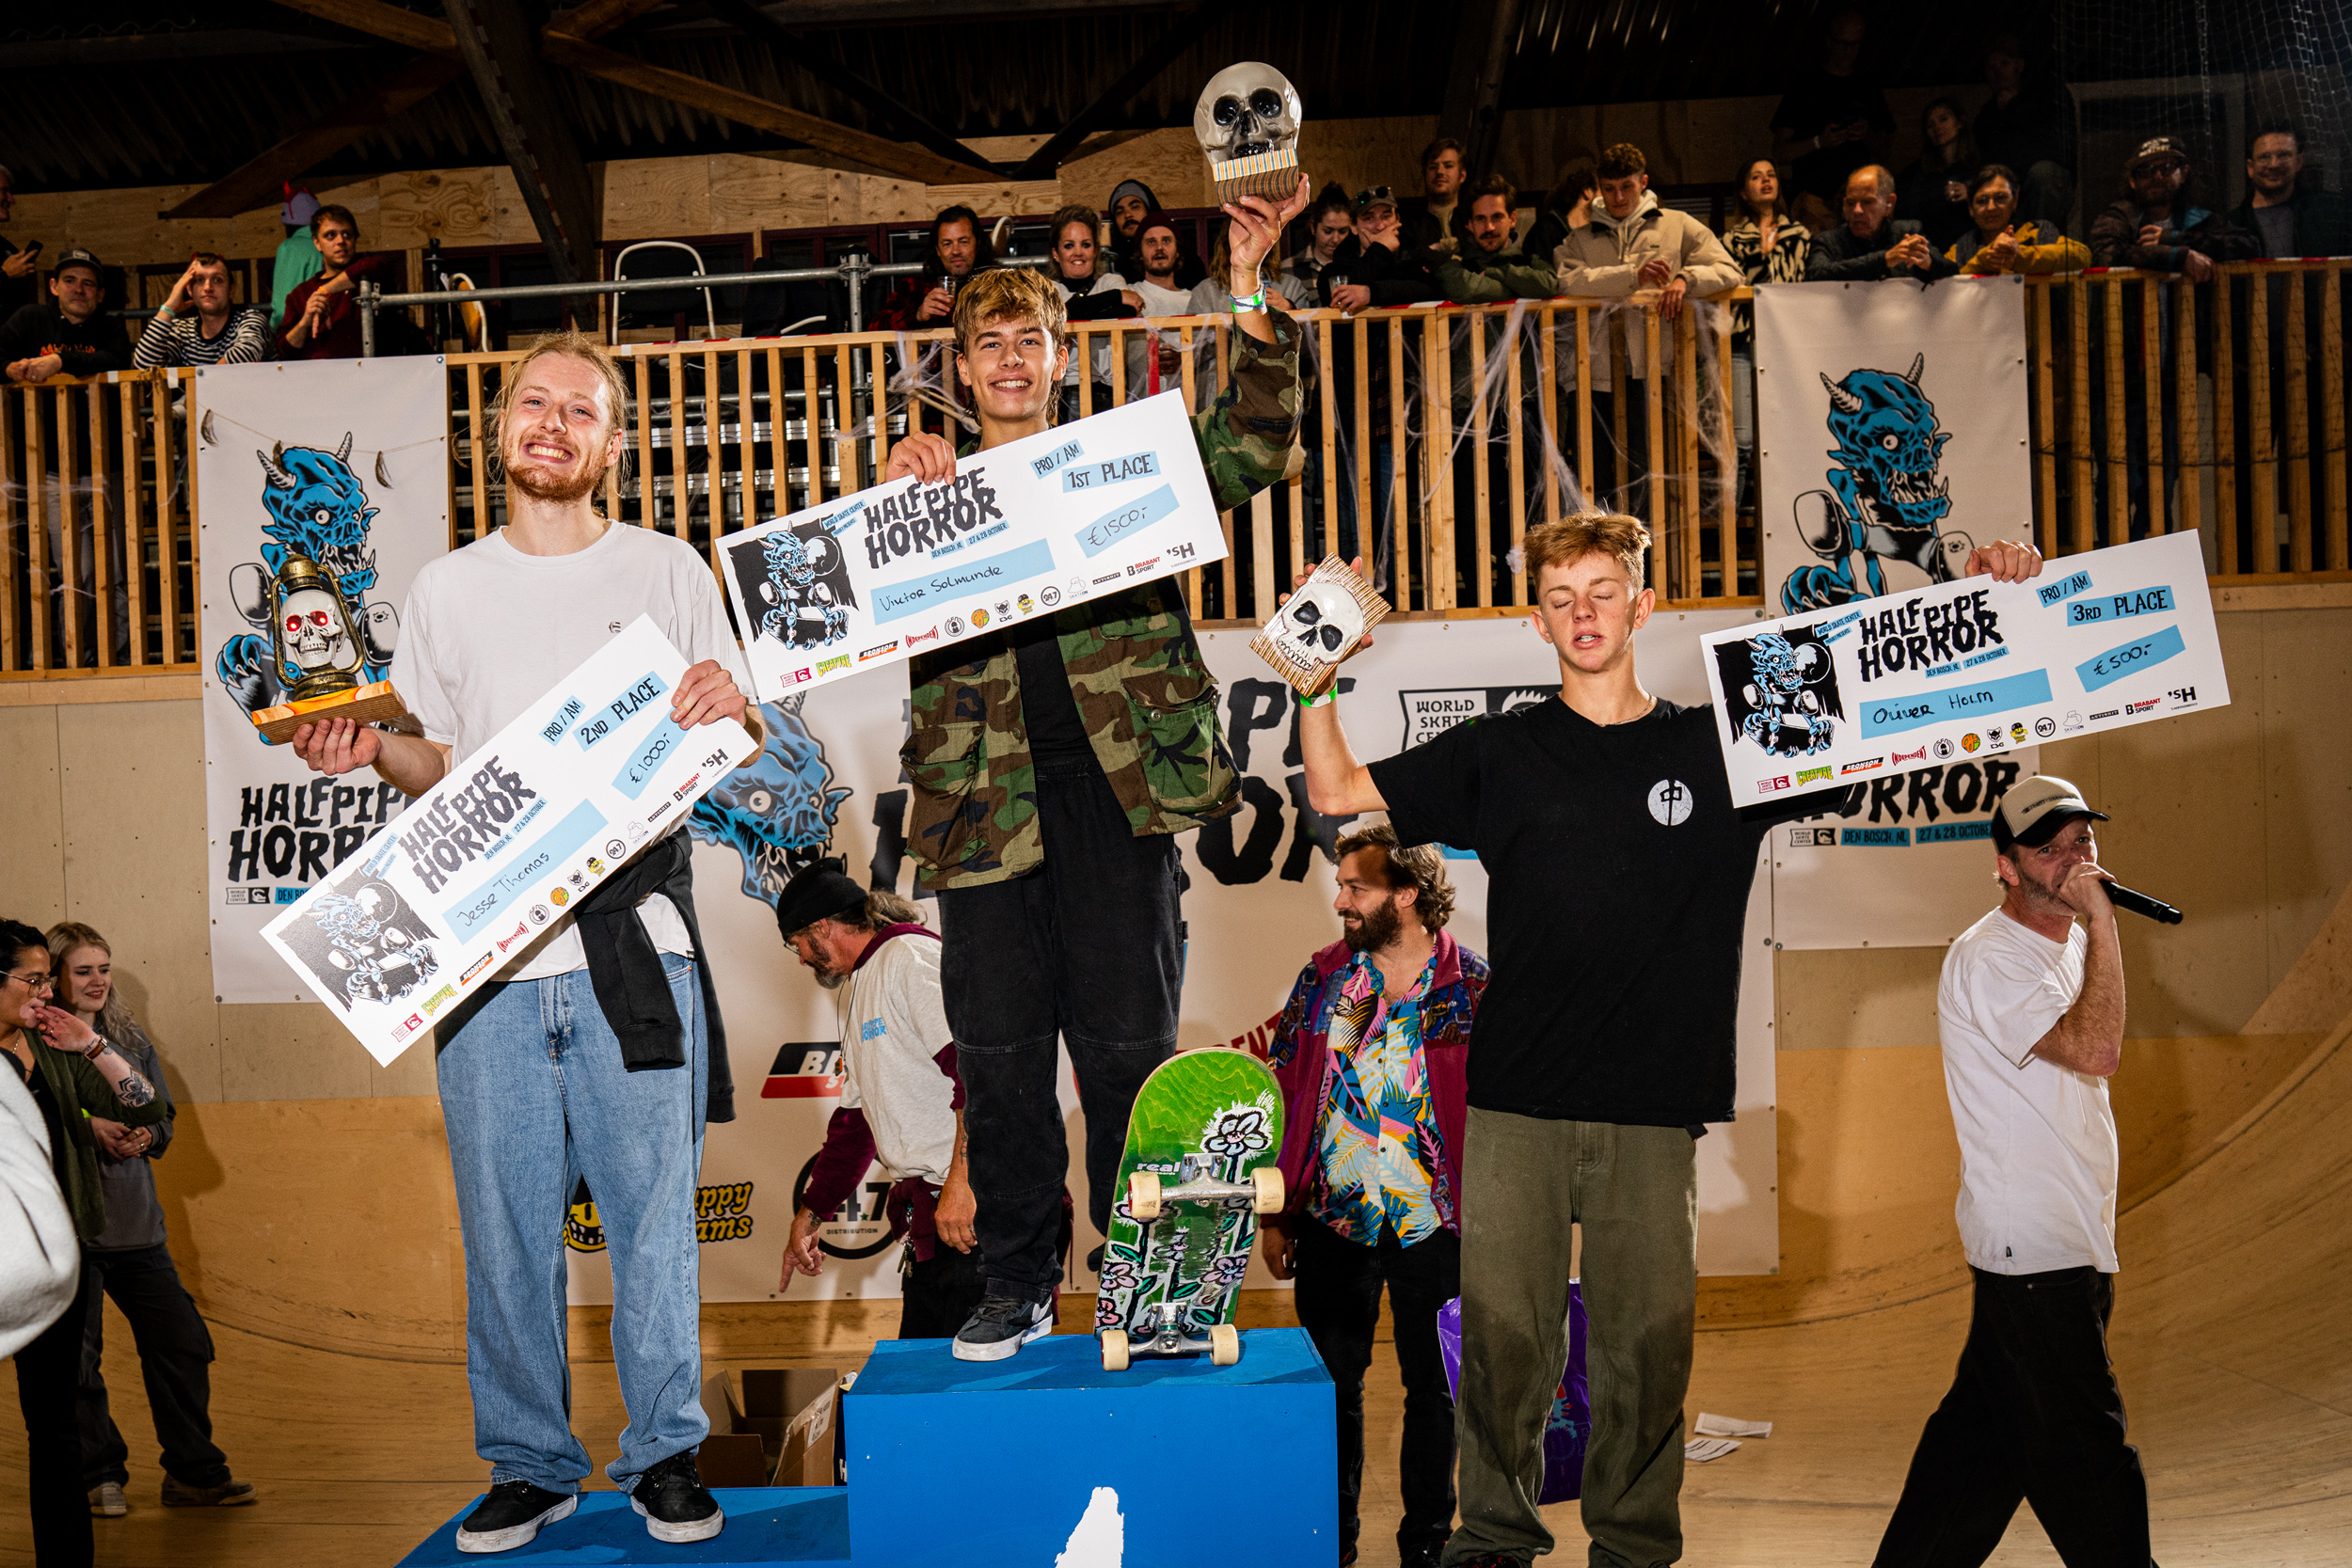 Winners Pro/AM at Halfpipe Horror 2023 at World Skate Center 2023